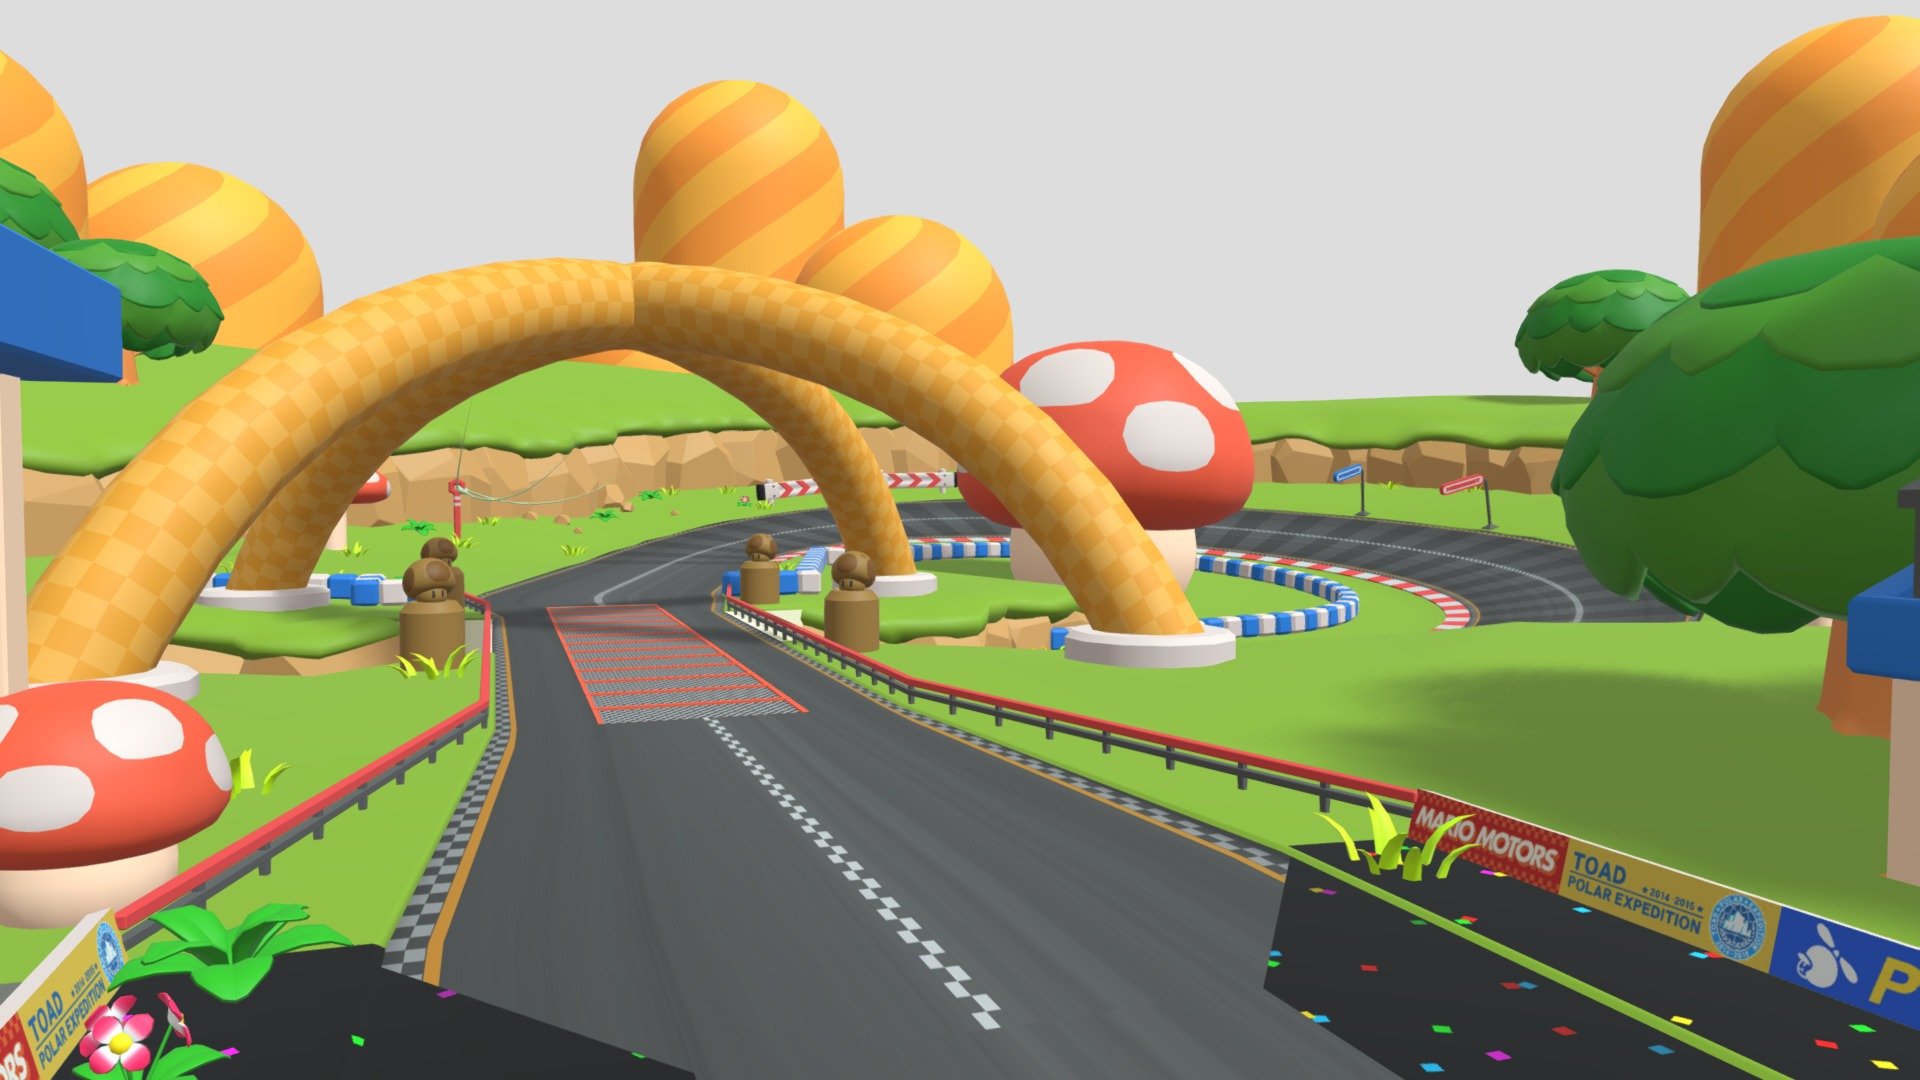 3ds Toad Circuit Tour Model Download Free 3d Model By Calebpointer Calebpointeryt 2944